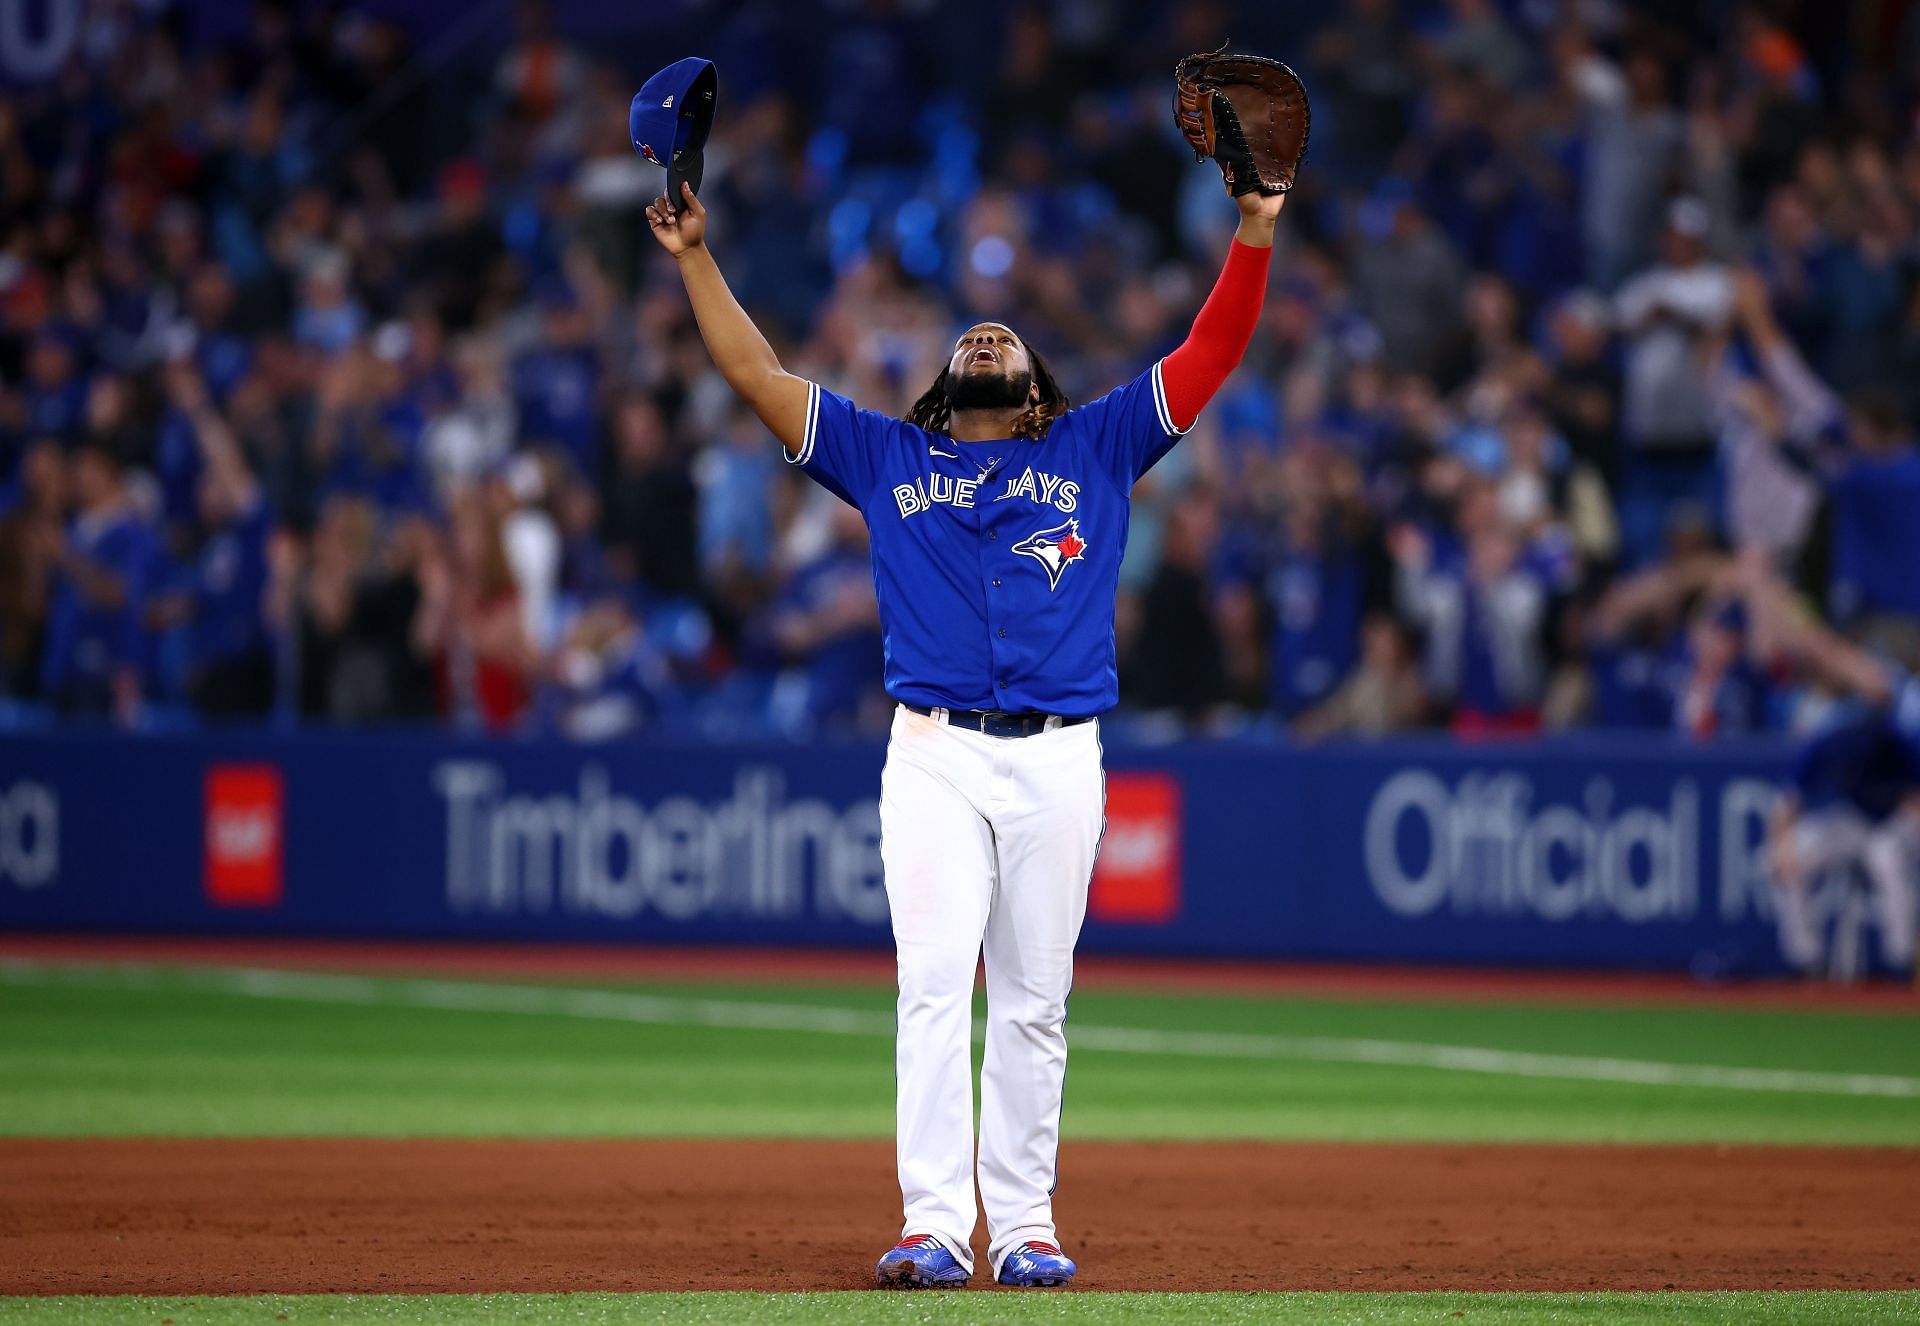 Why is there no 2022 Wildcard Series banner? : r/Torontobluejays